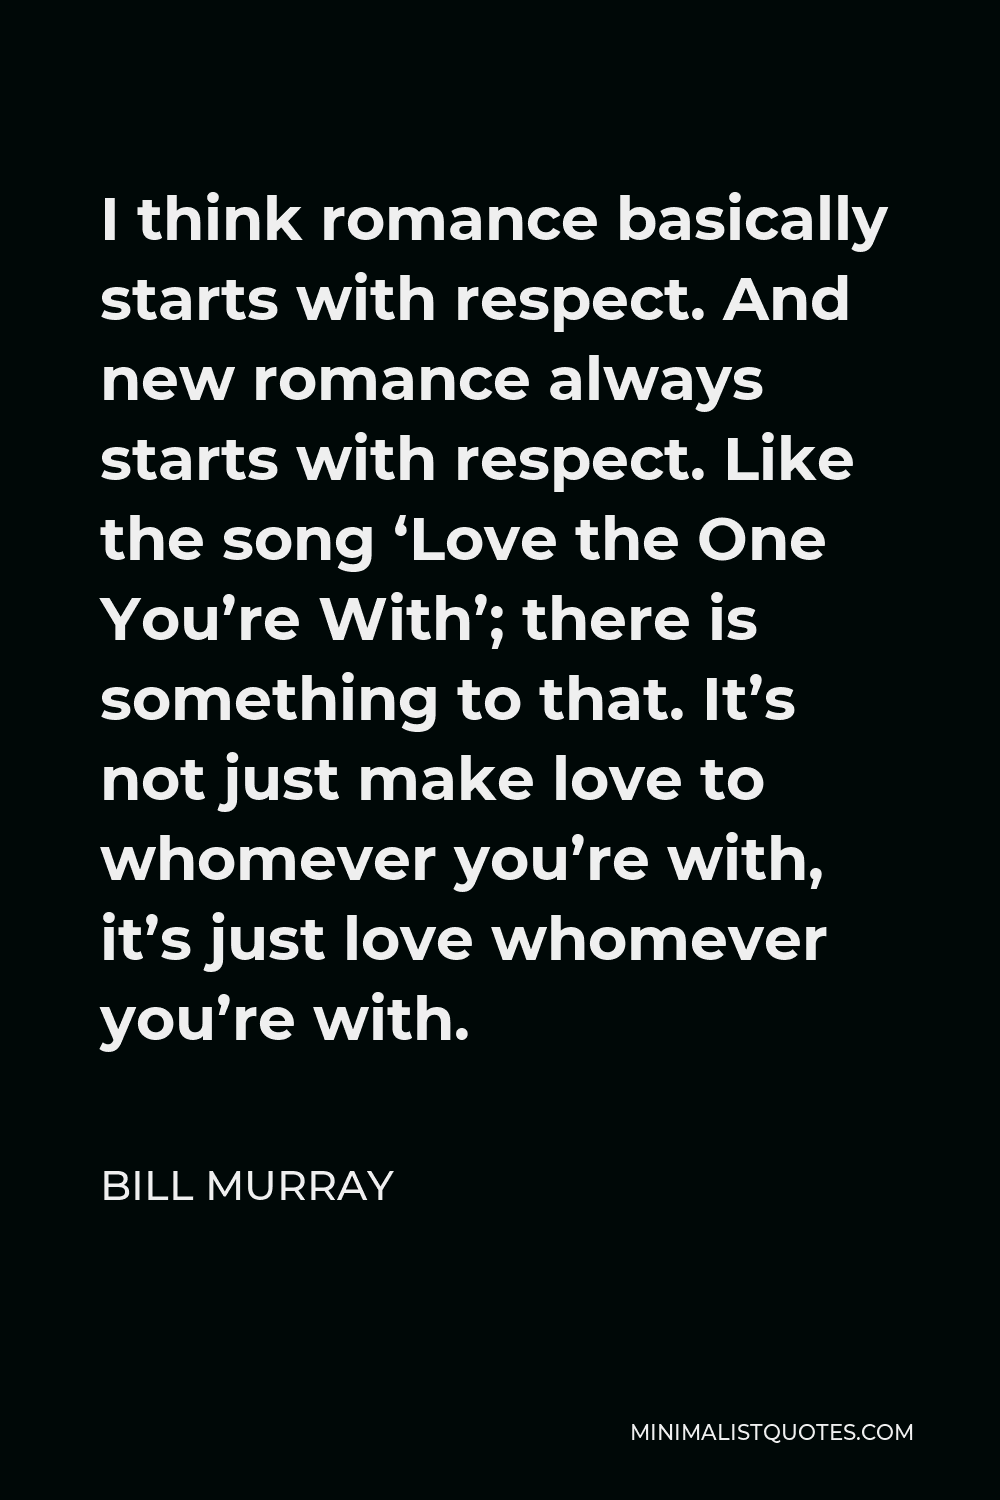 Bill Murray Quote - I think romance basically starts with respect. And new romance always starts with respect. Like the song ‘Love the One You’re With’; there is something to that. It’s not just make love to whomever you’re with, it’s just love whomever you’re with.